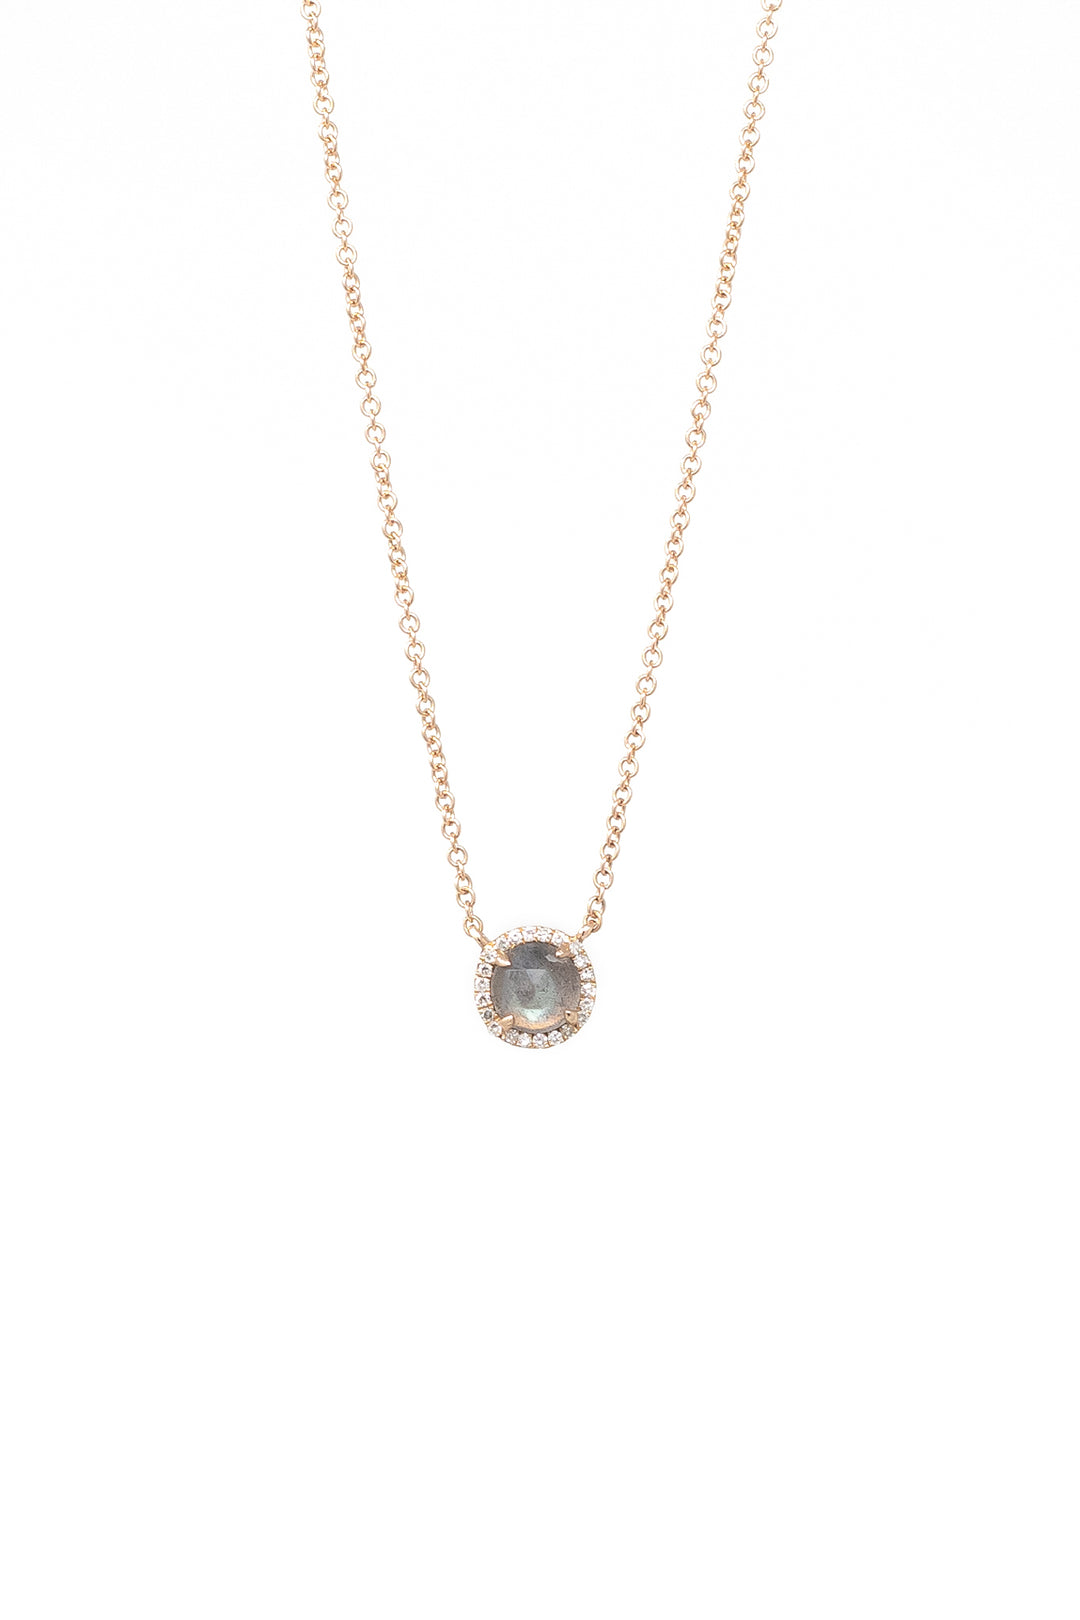 .05 CT DIAMOND NECKLACE - Kingfisher Road - Online Boutique